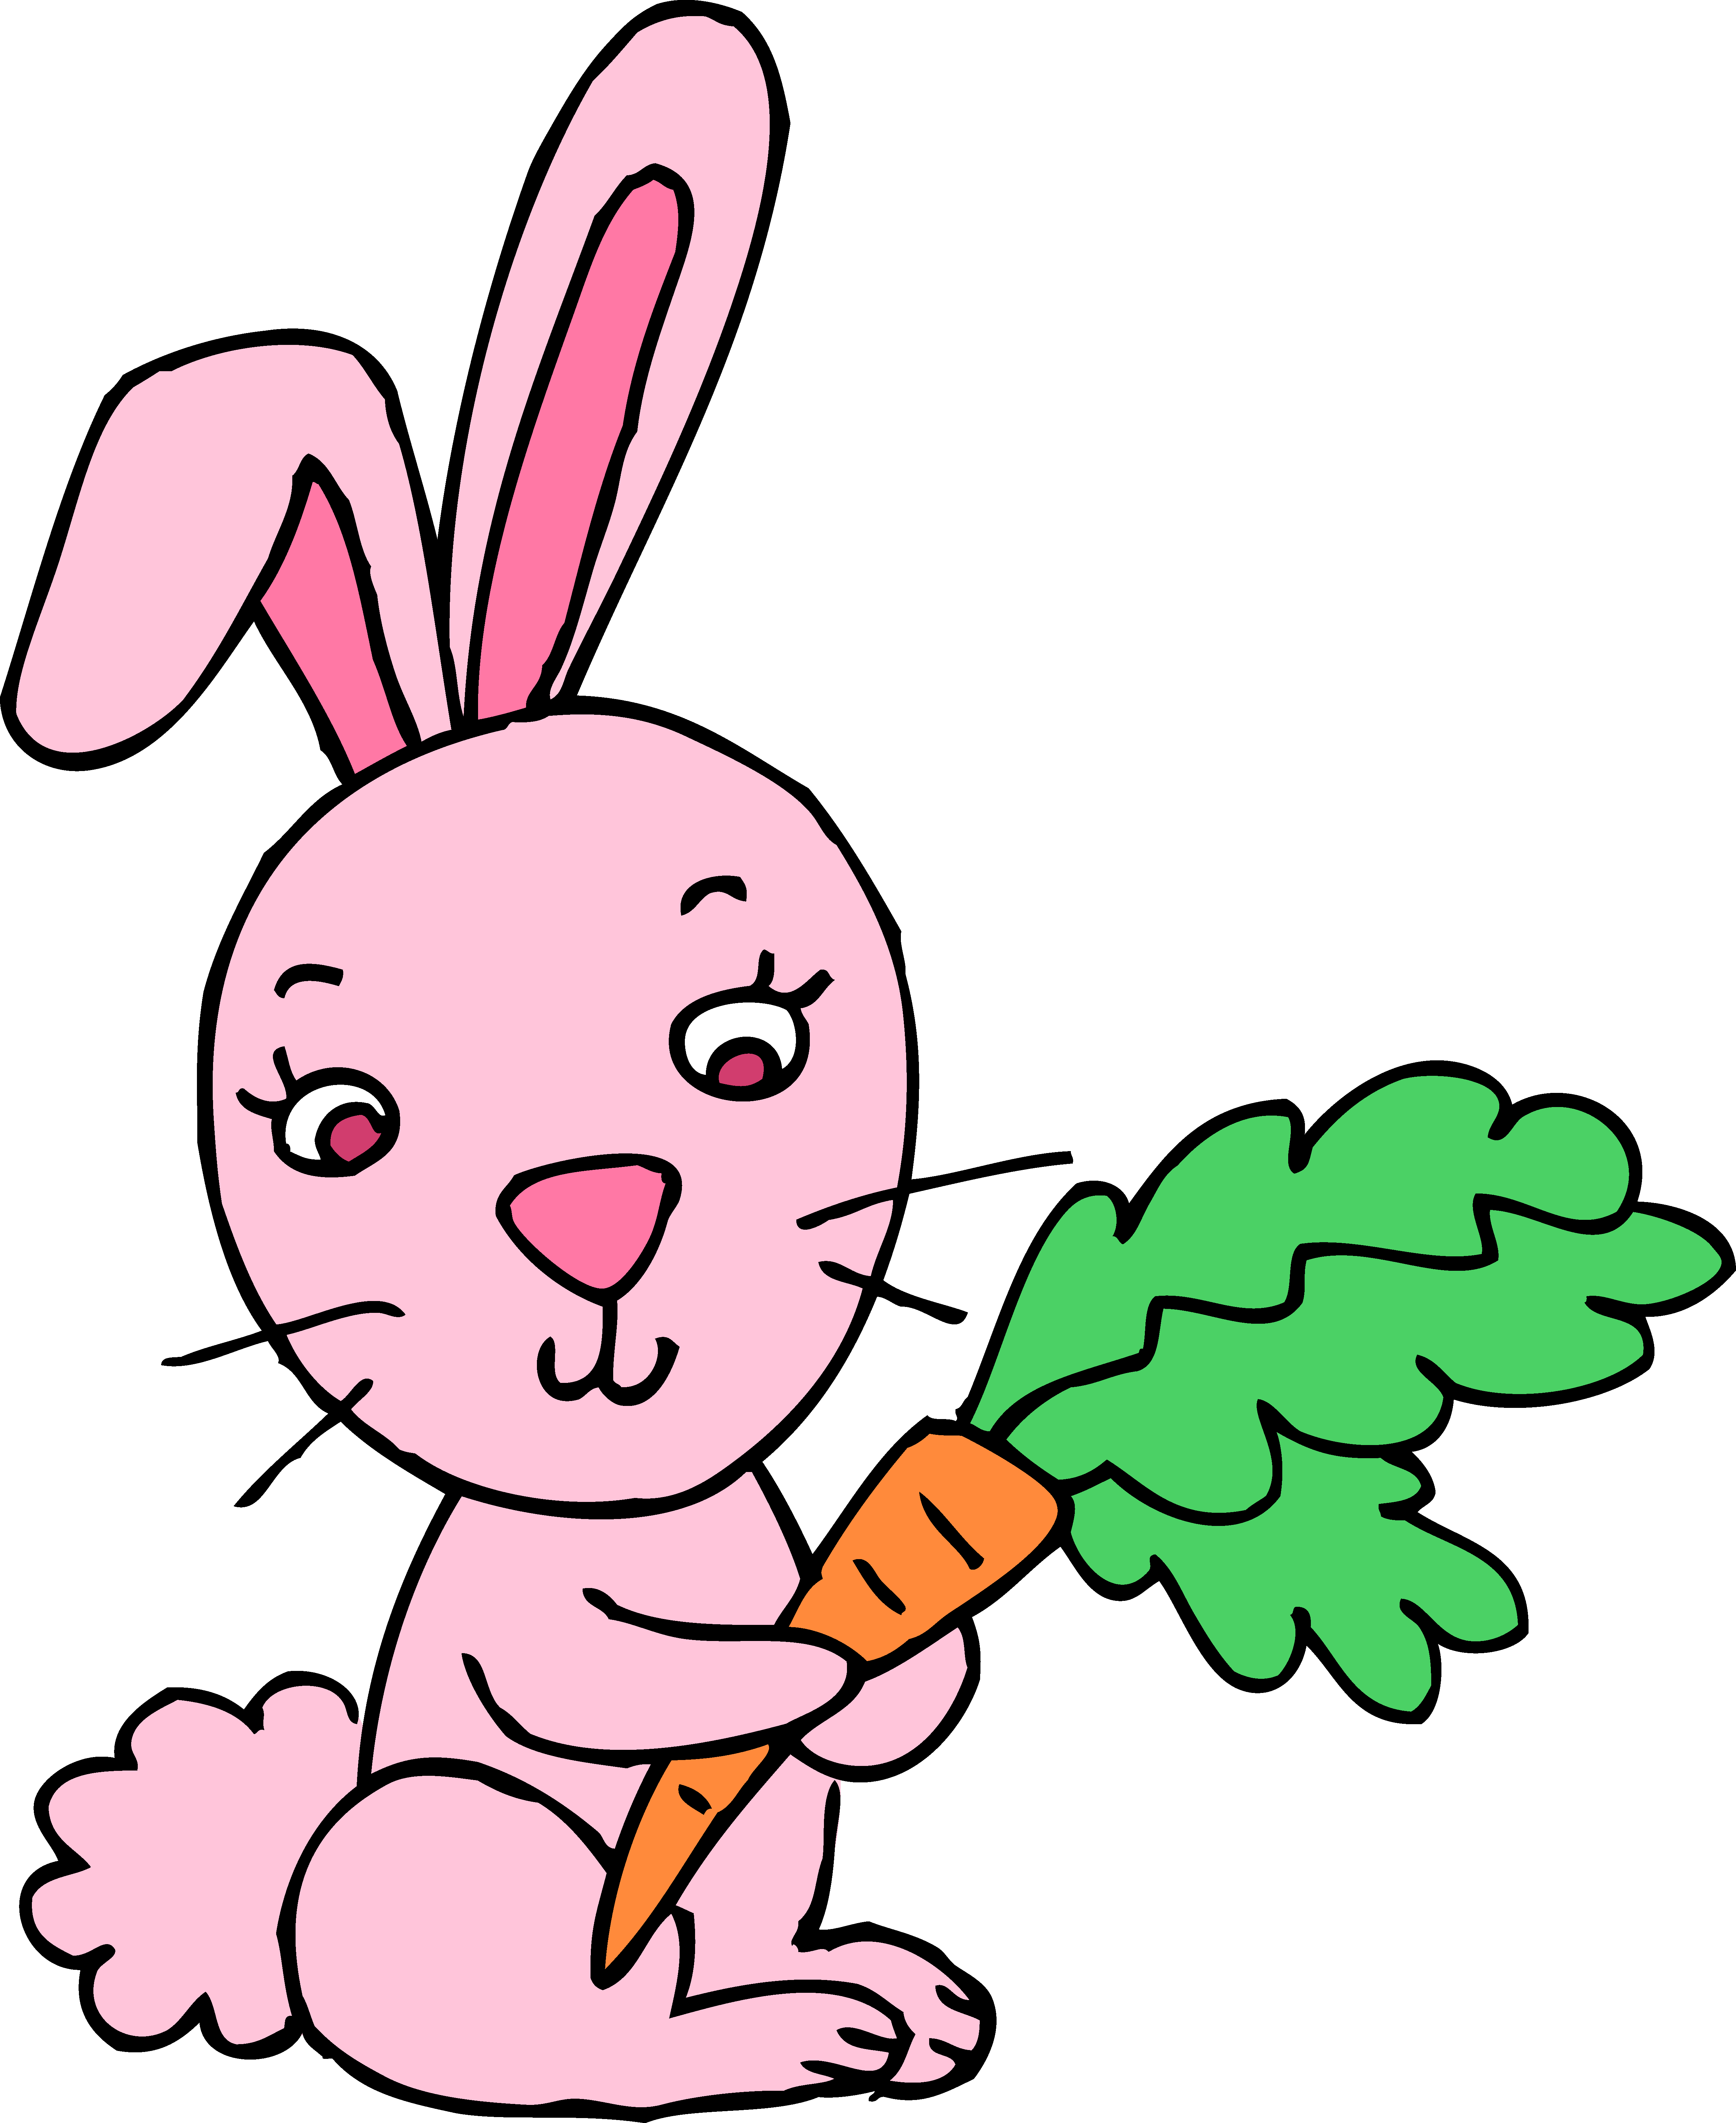 Free clipart rabbit. Pink bunny with carrot